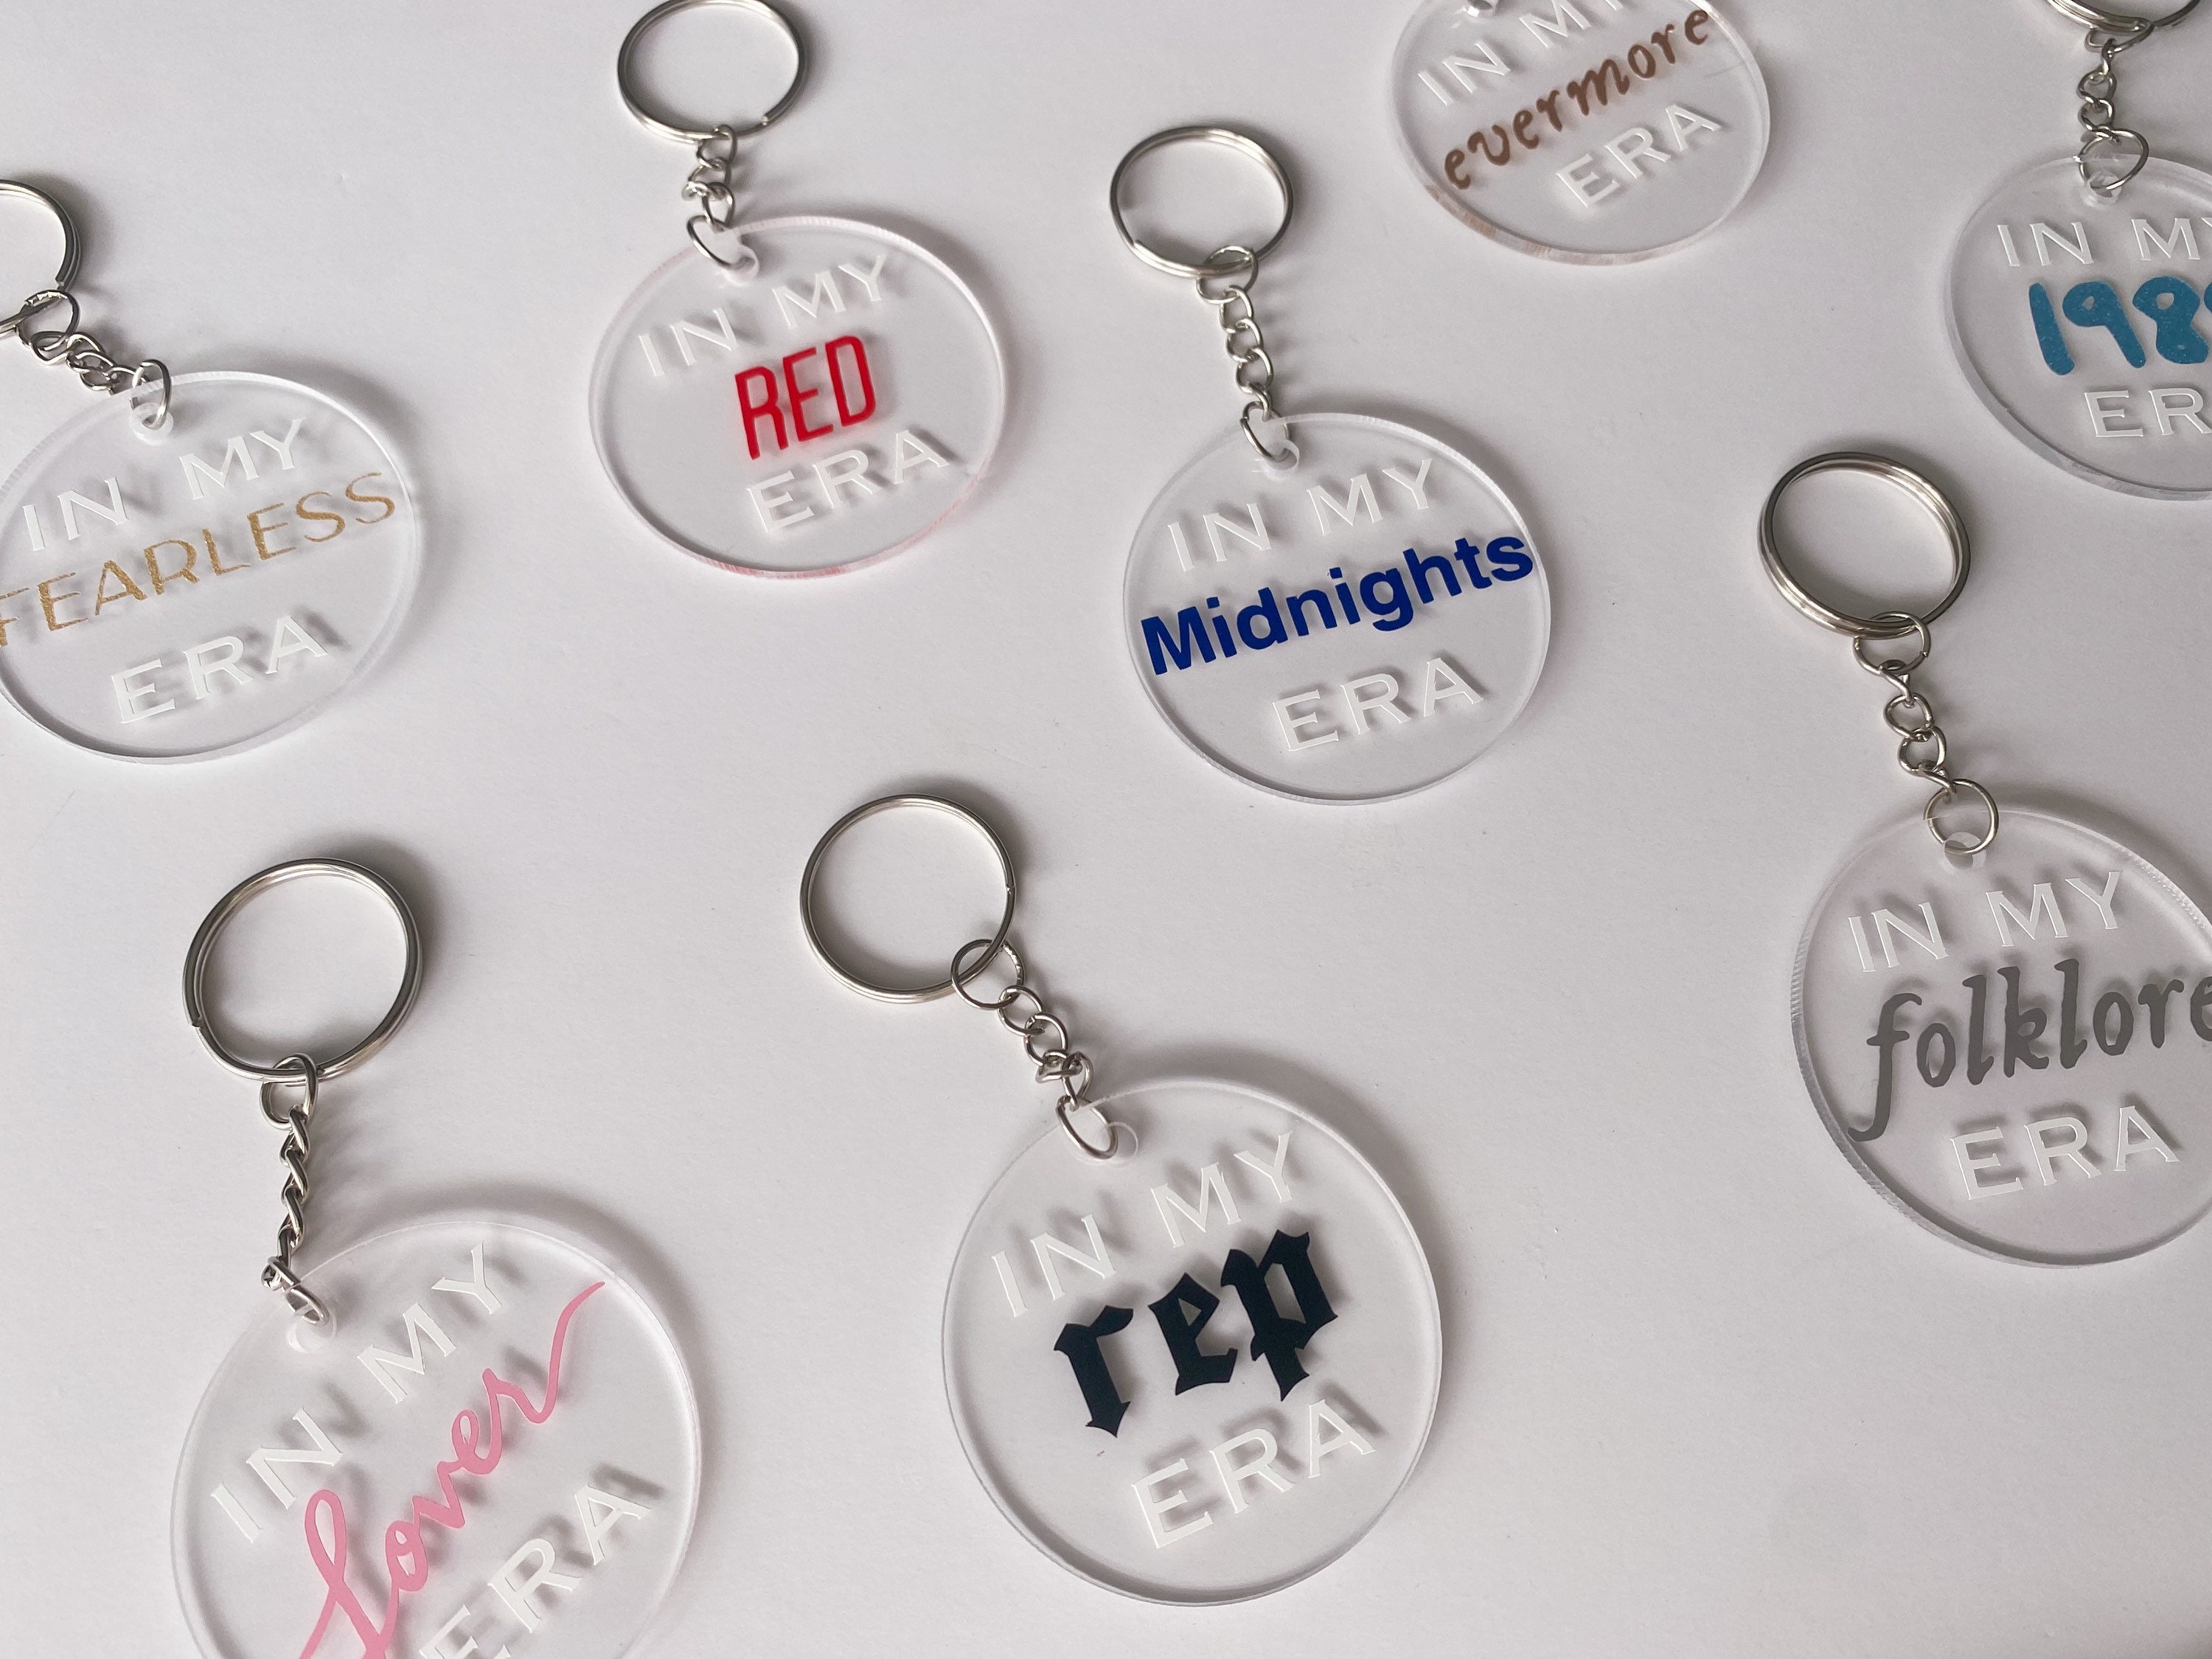 Taylor Swift Folklore and Evermore Keychains – Three Bears Design Studio